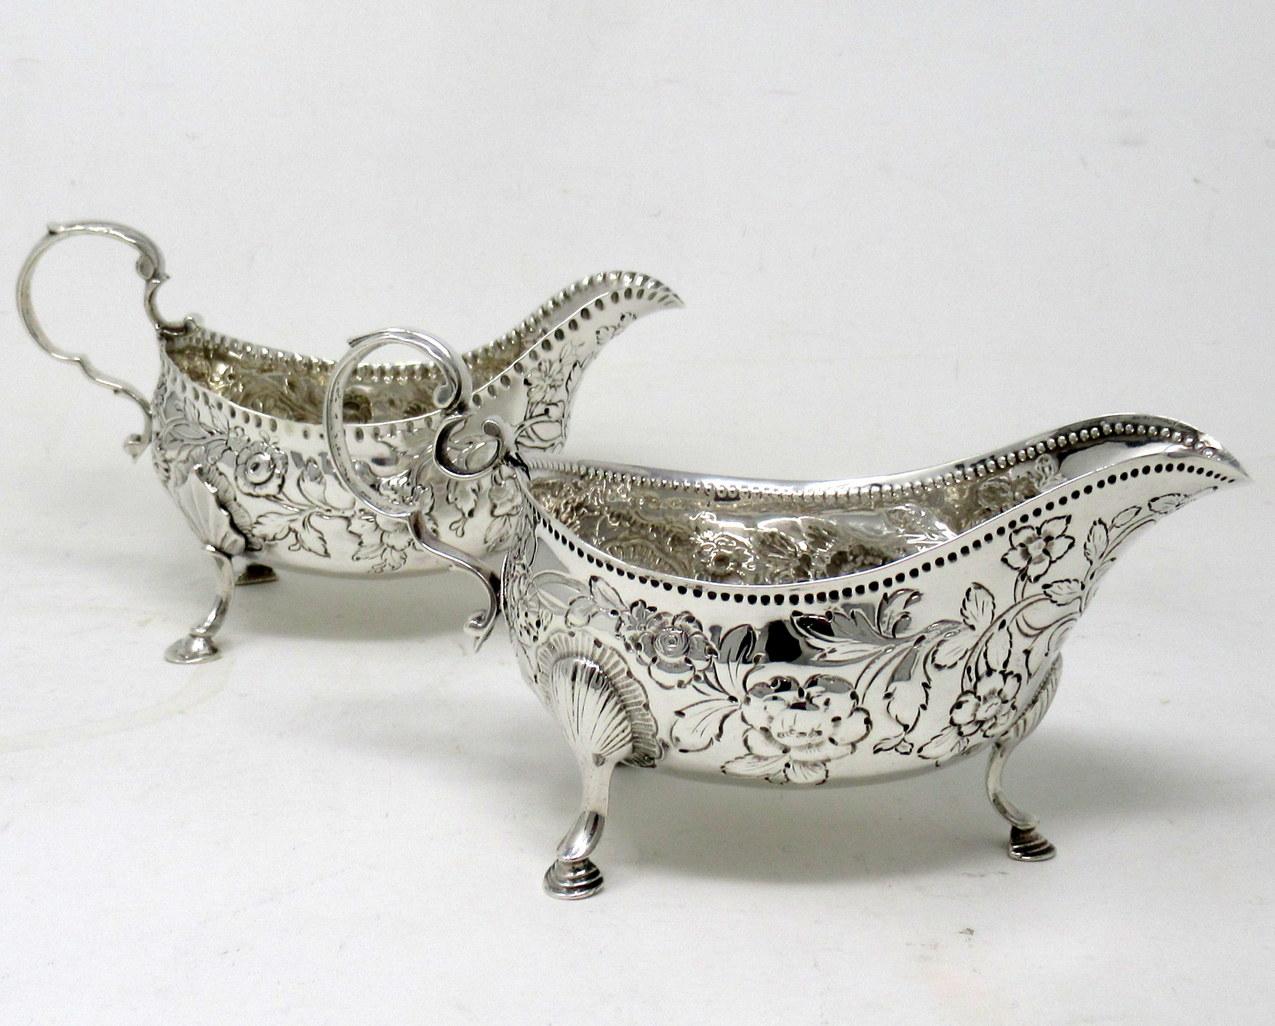 Superb Matched Pair of Heavy Gauge Irish Georgian Eighteenth Century Large Silver Gravy Boats of traditional oval form, of outstanding quality and exceptional condition for such early pieces. 

With fine beaded rim and leaf capped treble scroll